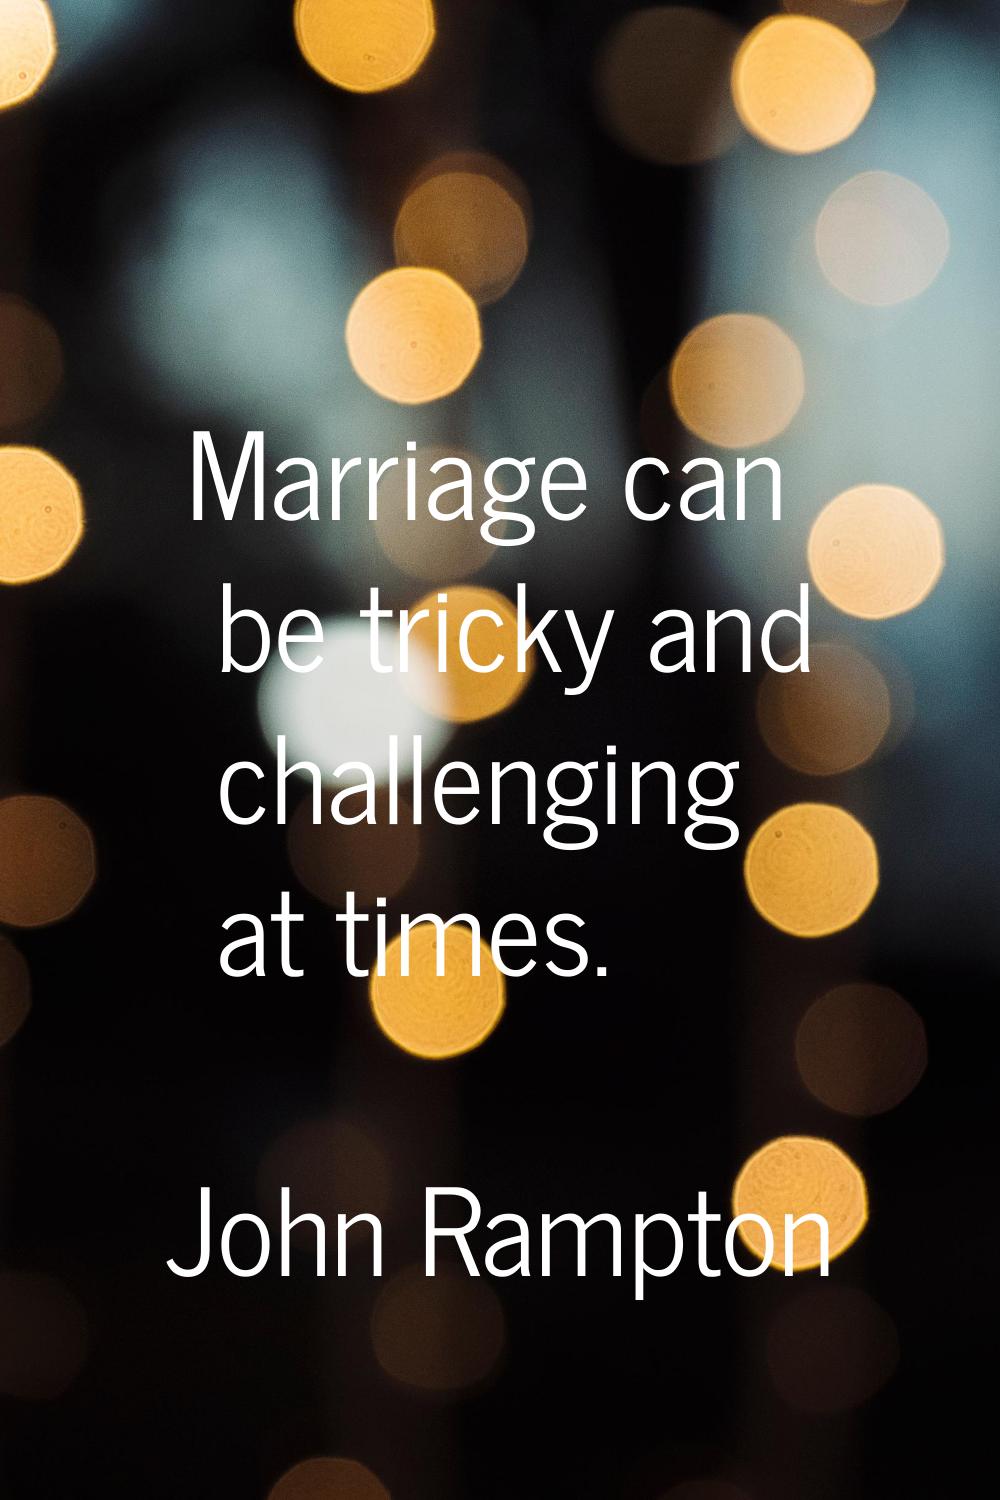 Marriage can be tricky and challenging at times.